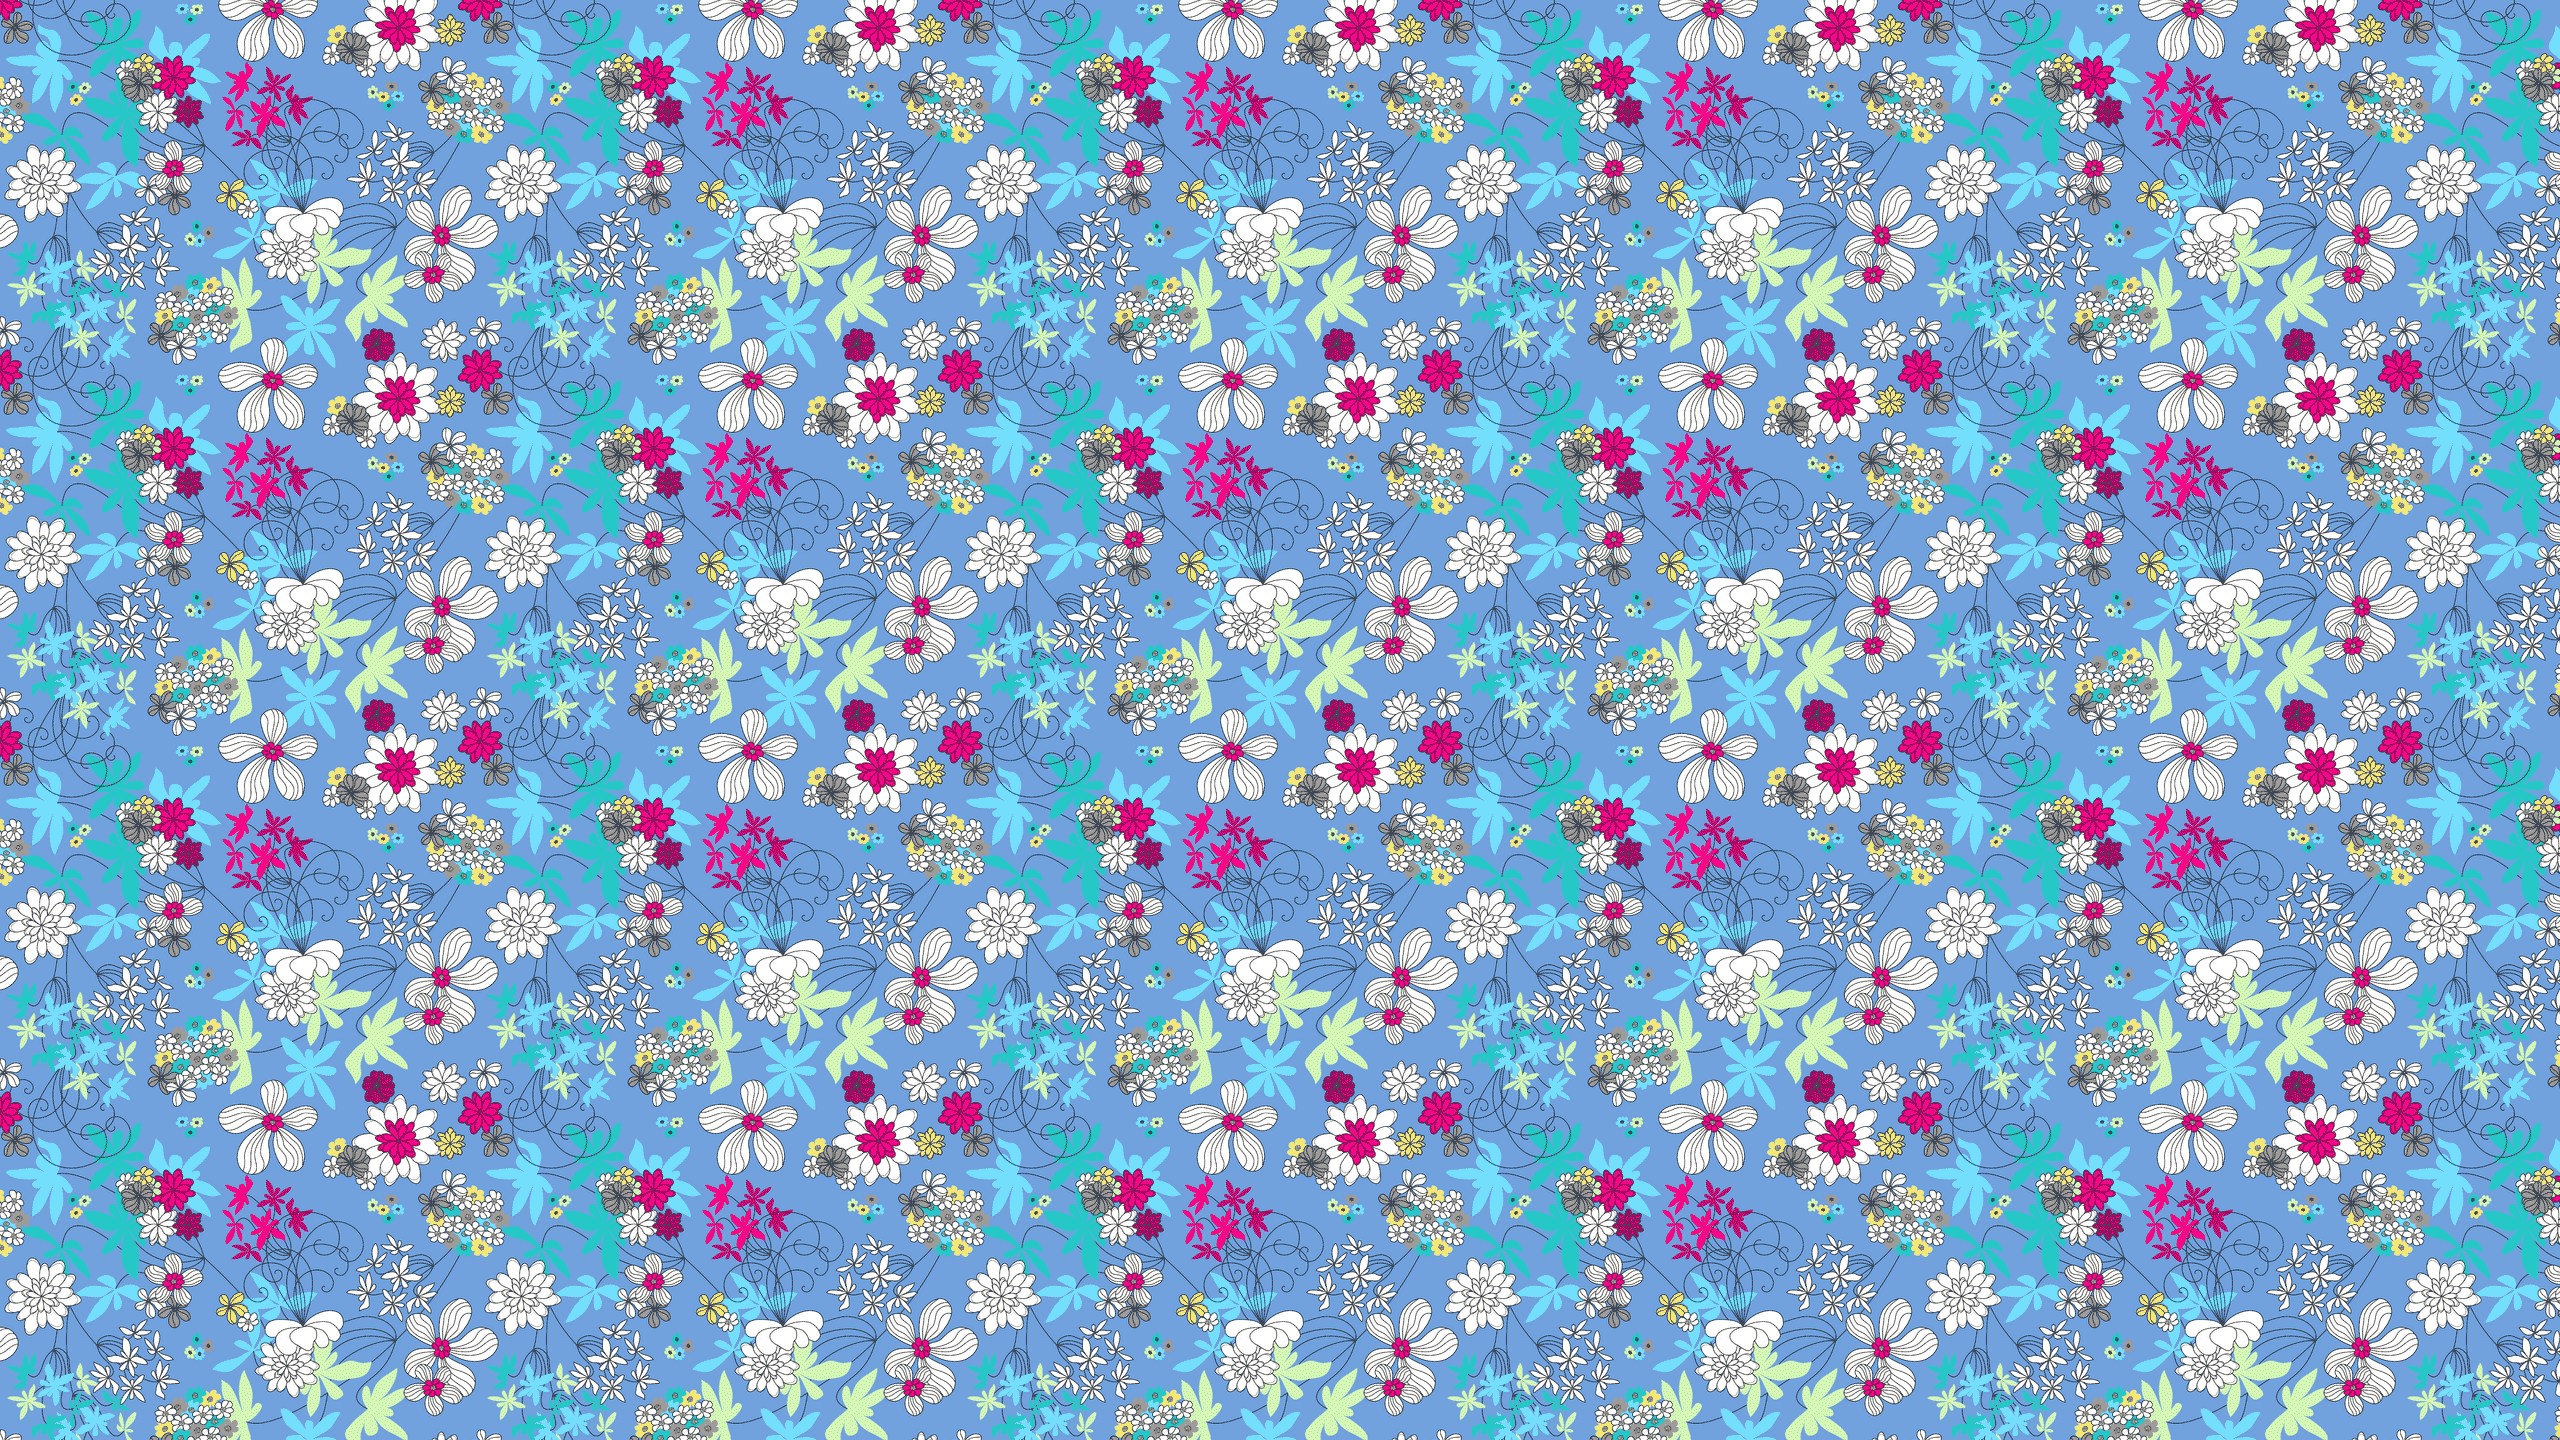 This Cute Flowers Desktop Wallpaper Is Easy Just Save The